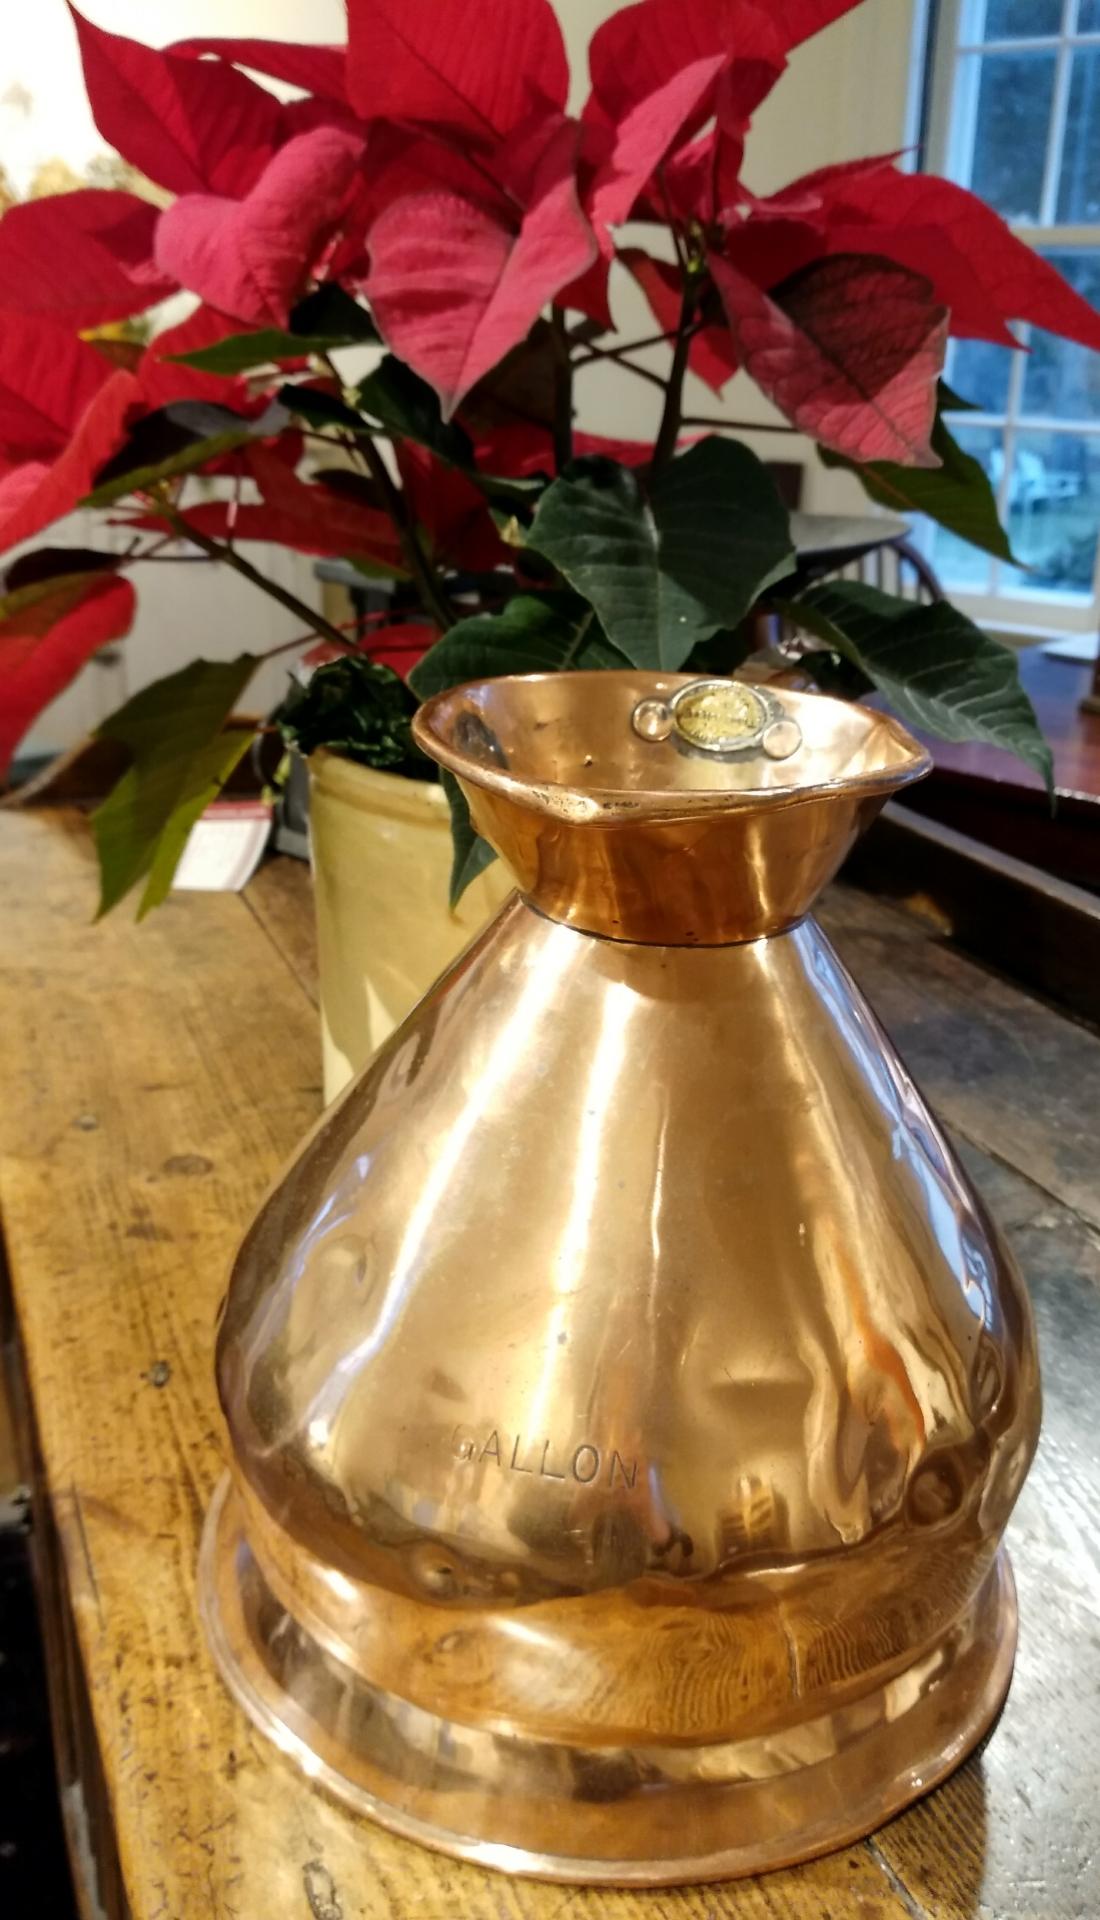 We love this bright, shiny object! There's something special about antique French copper -- it never fails to please. A perfect home accent or a great gift. This gallon-sized pitcher has great proportions, with a nice stamped metal detail inside the